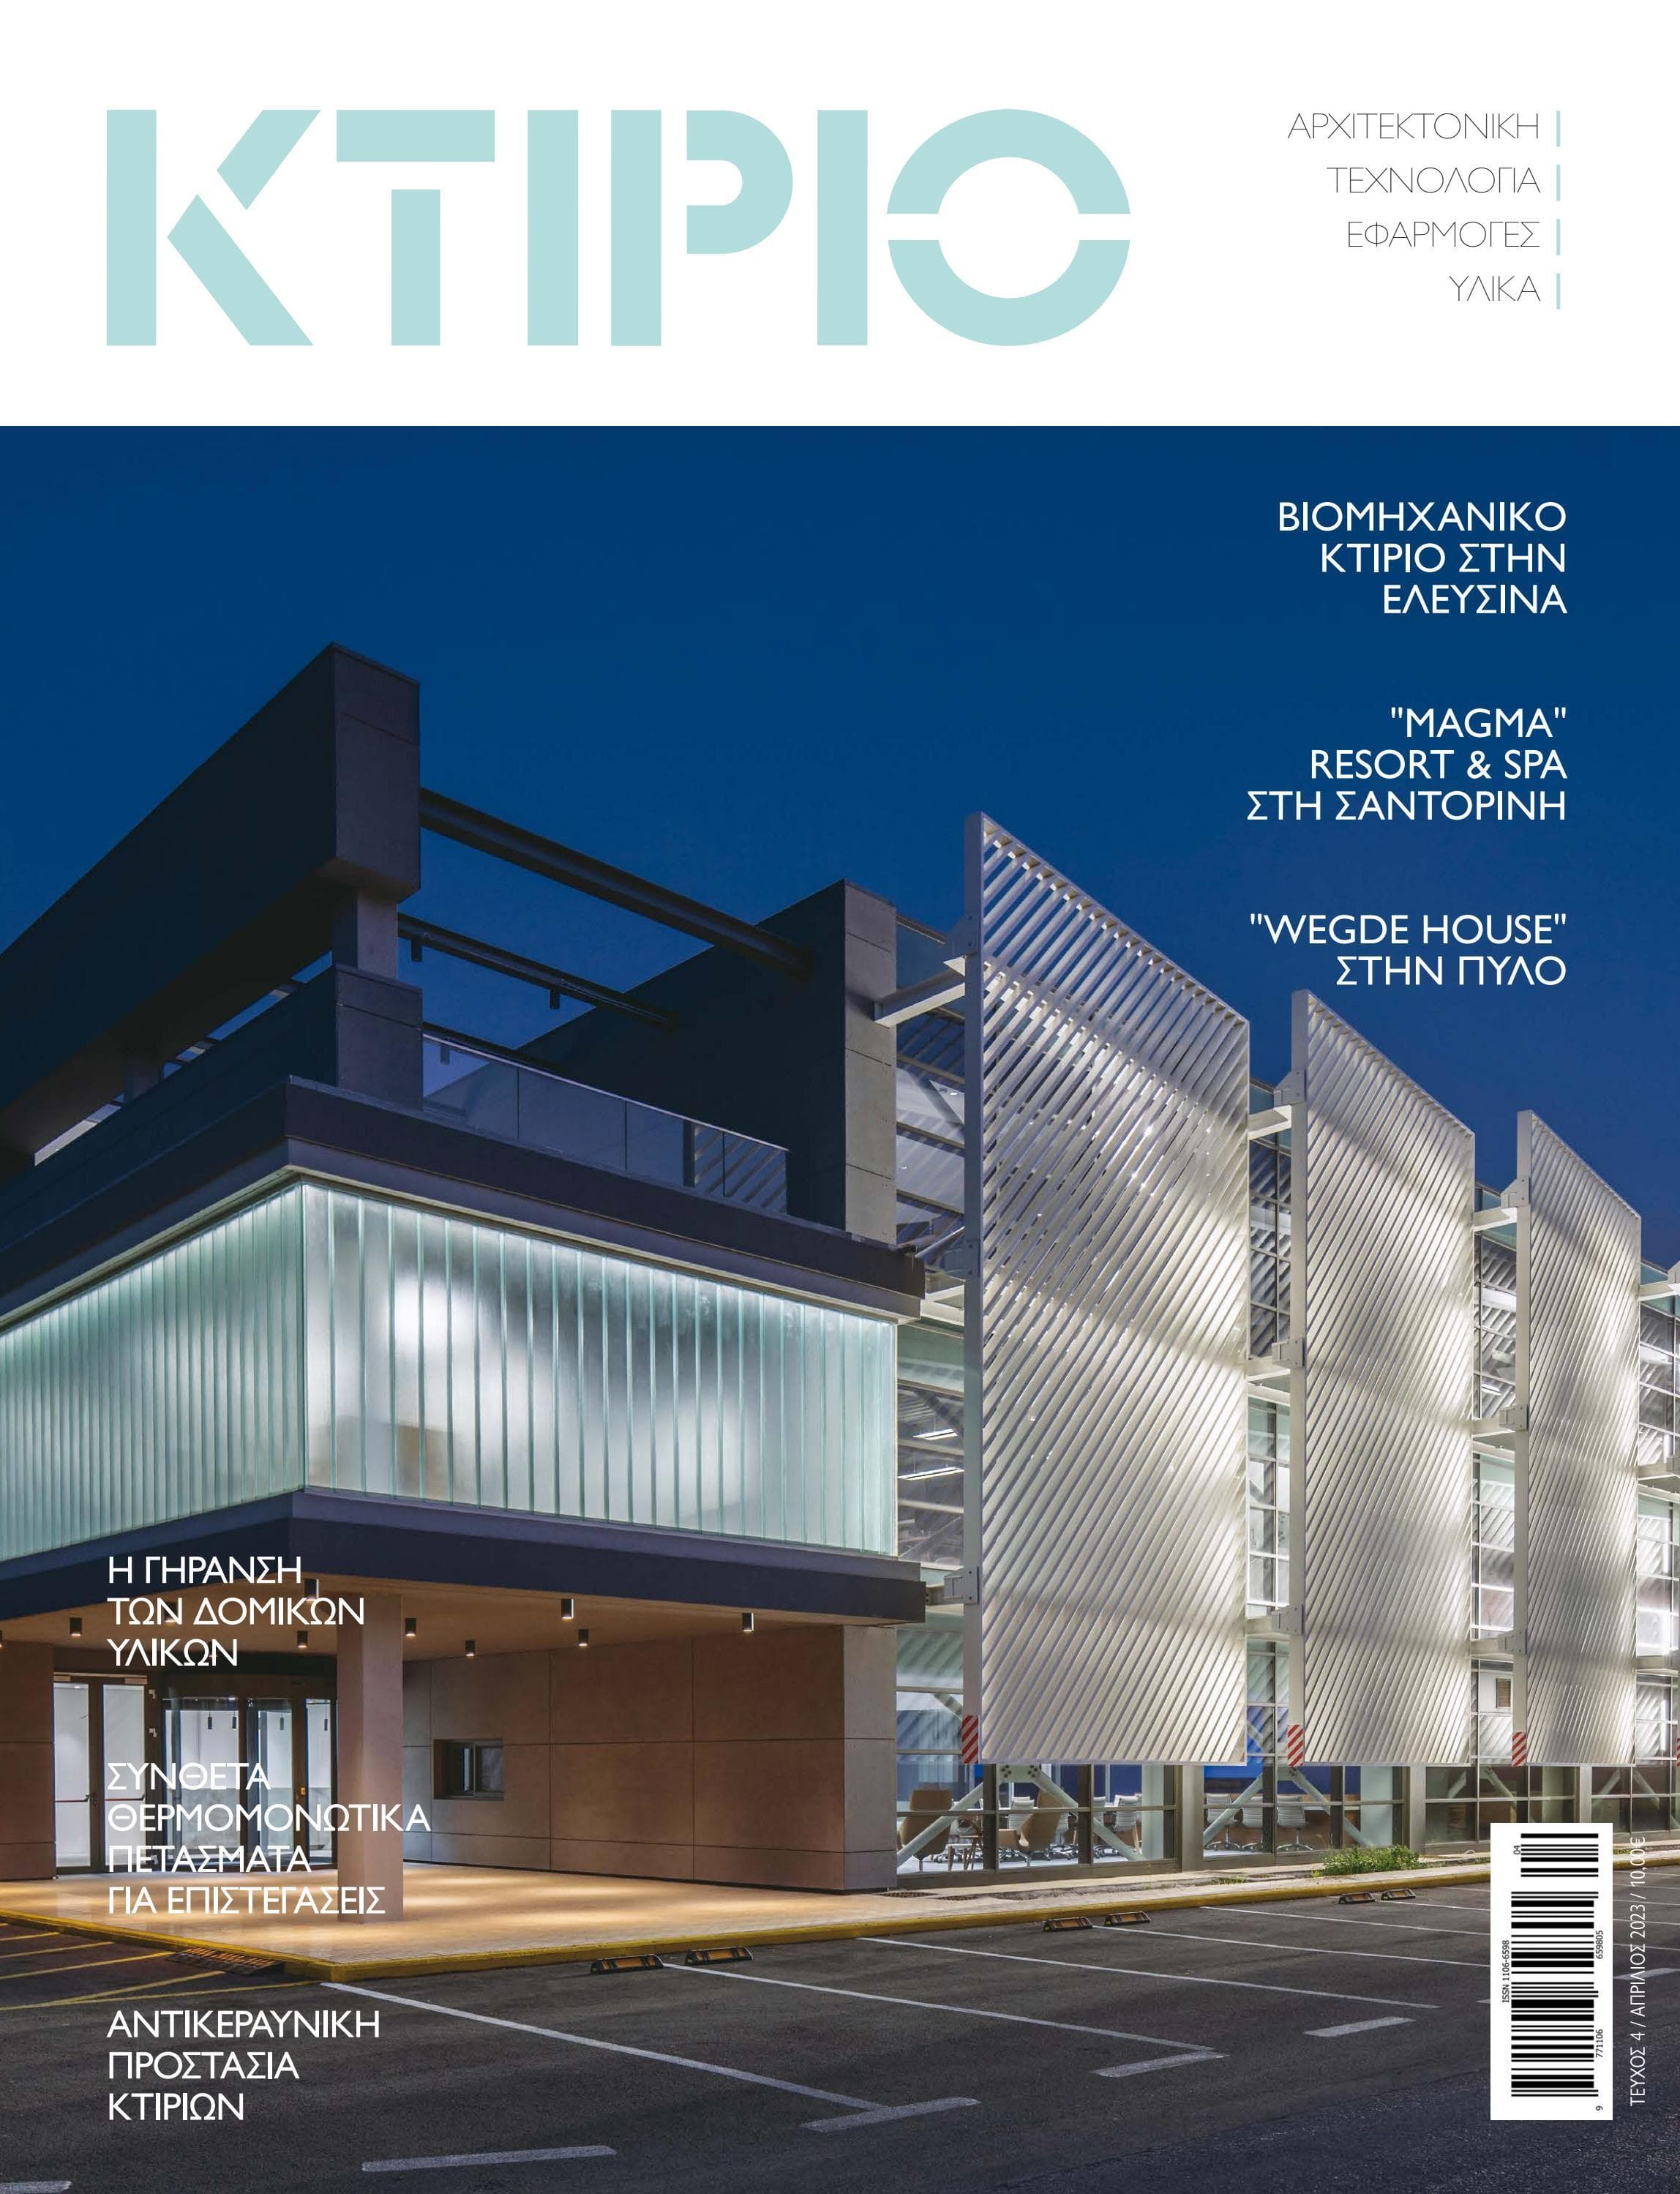 Our new offices in Elefsina featured at Ktirio magazine